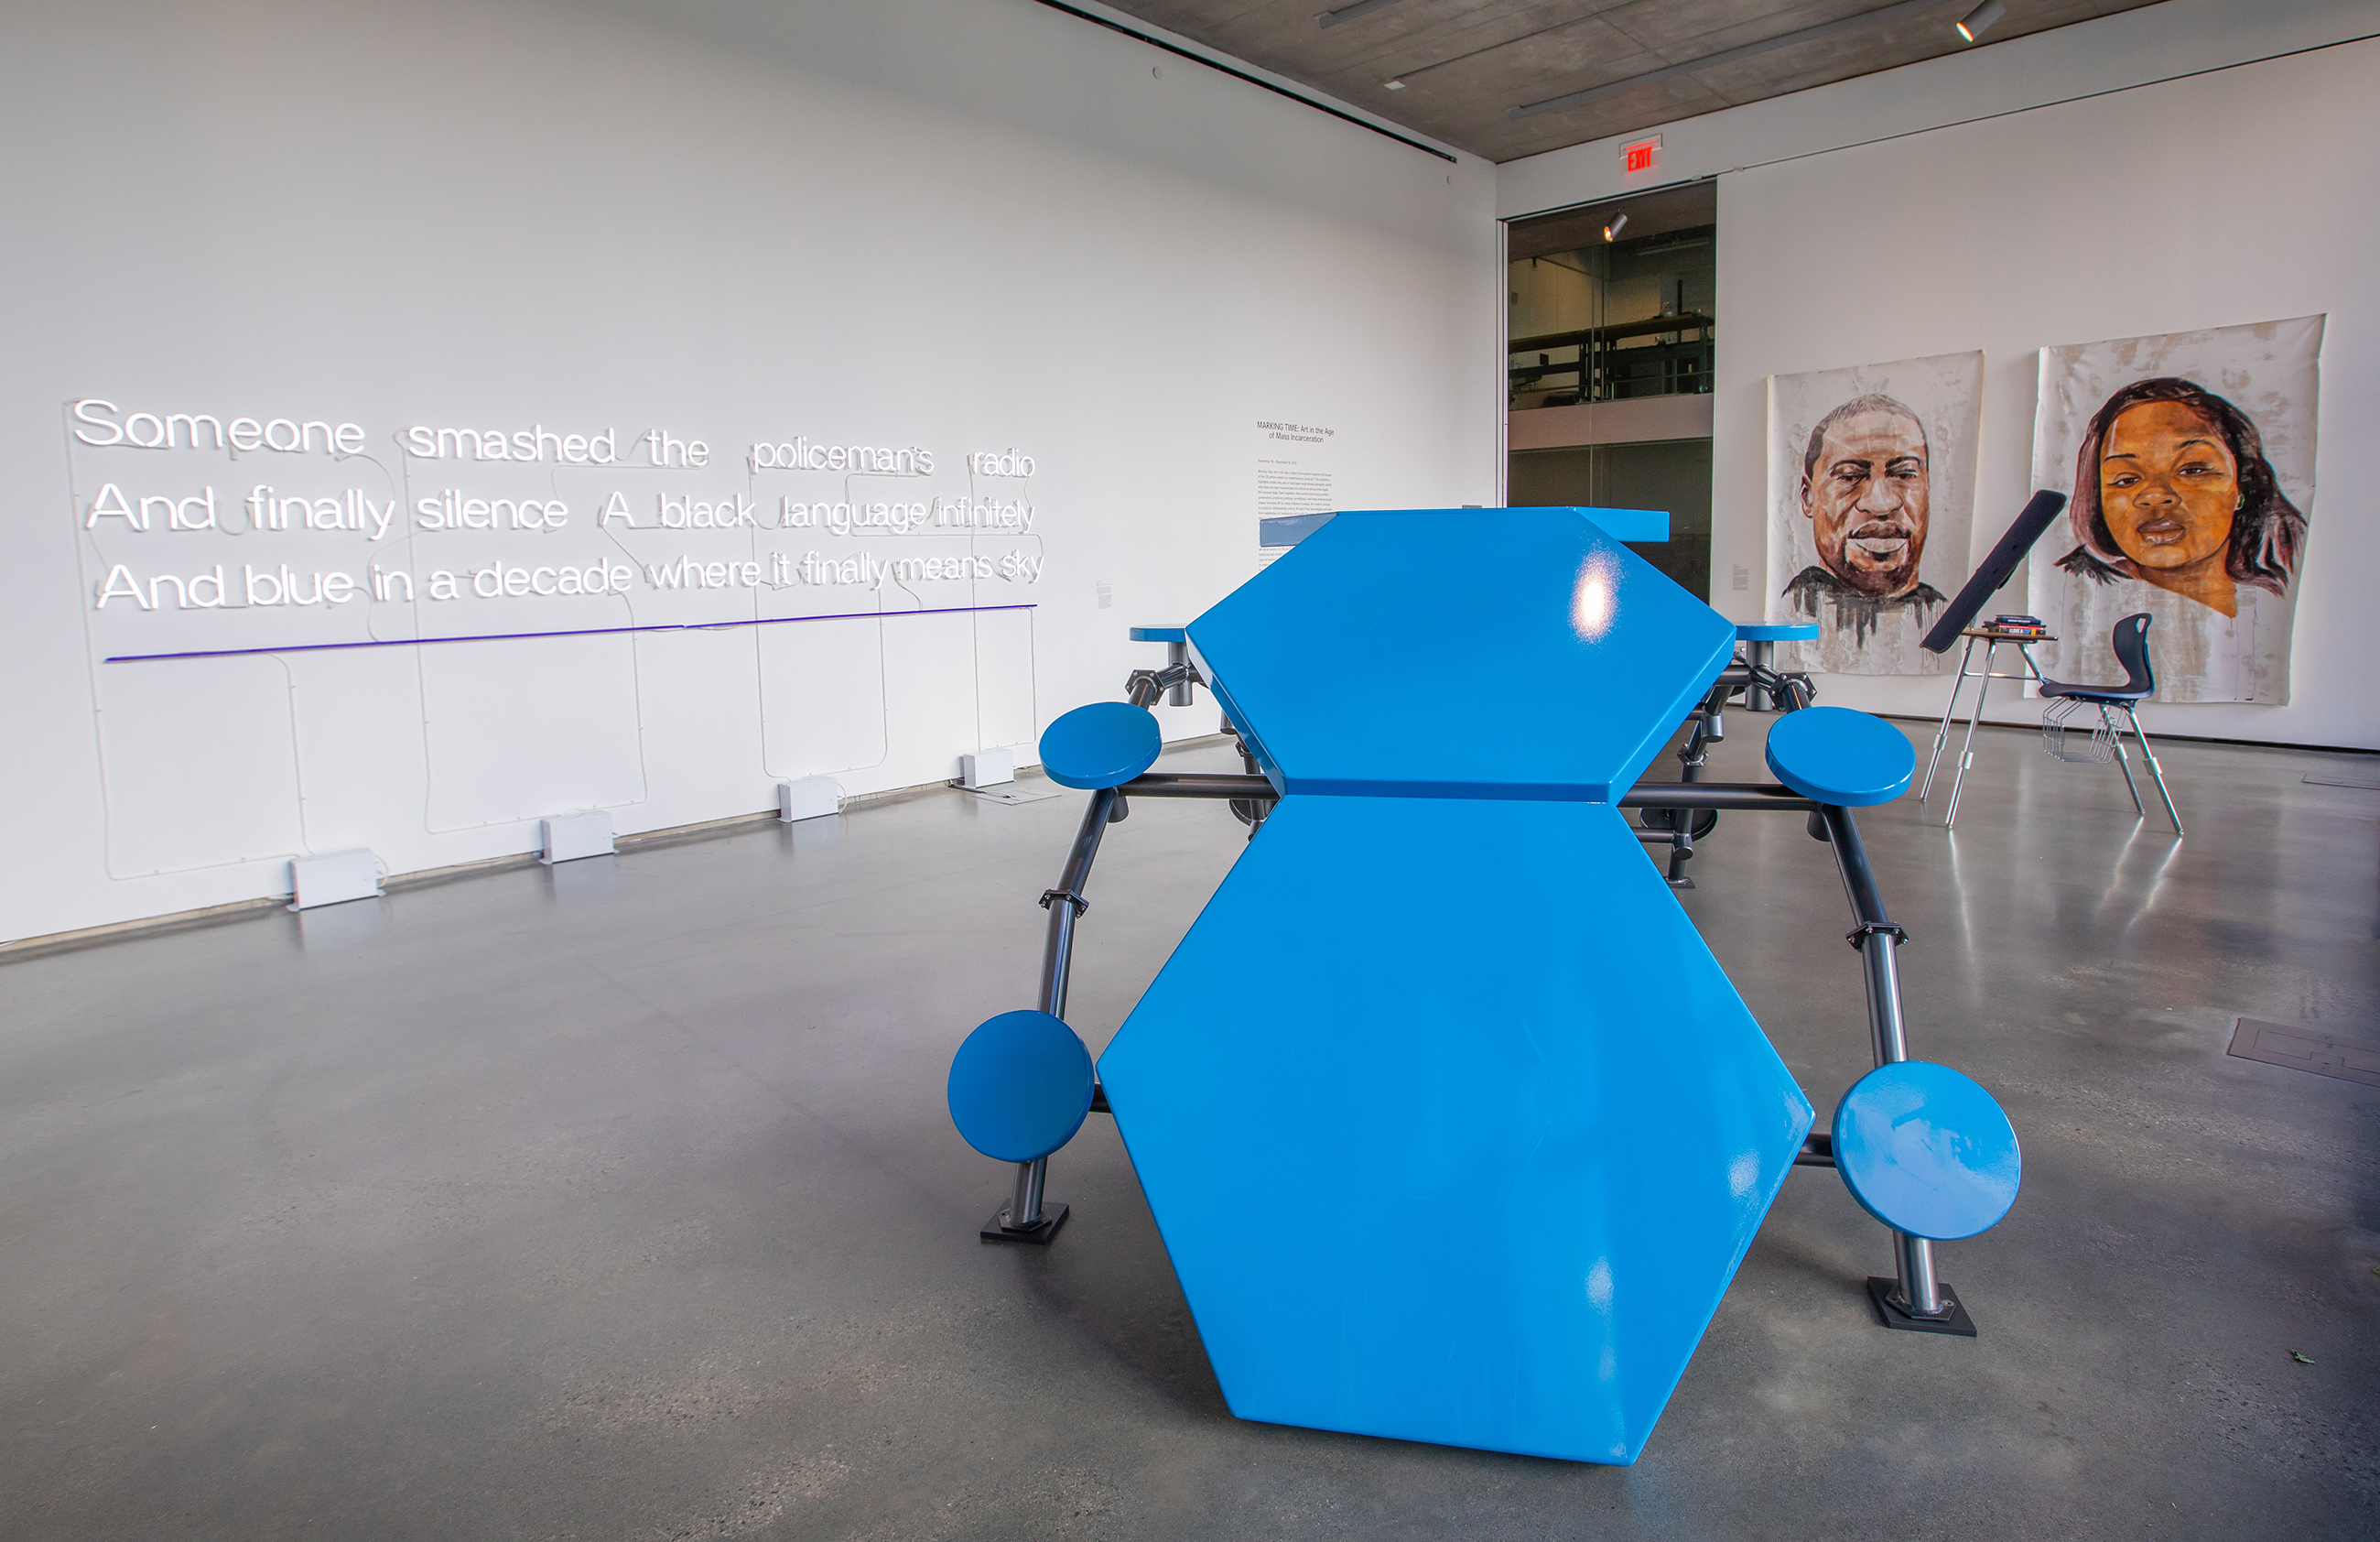 Gallery space with a bright blue sculpture in the foreground, and large-scale paintings of George Floyd and Breonna Taylor on one wall and illuminated text on another.